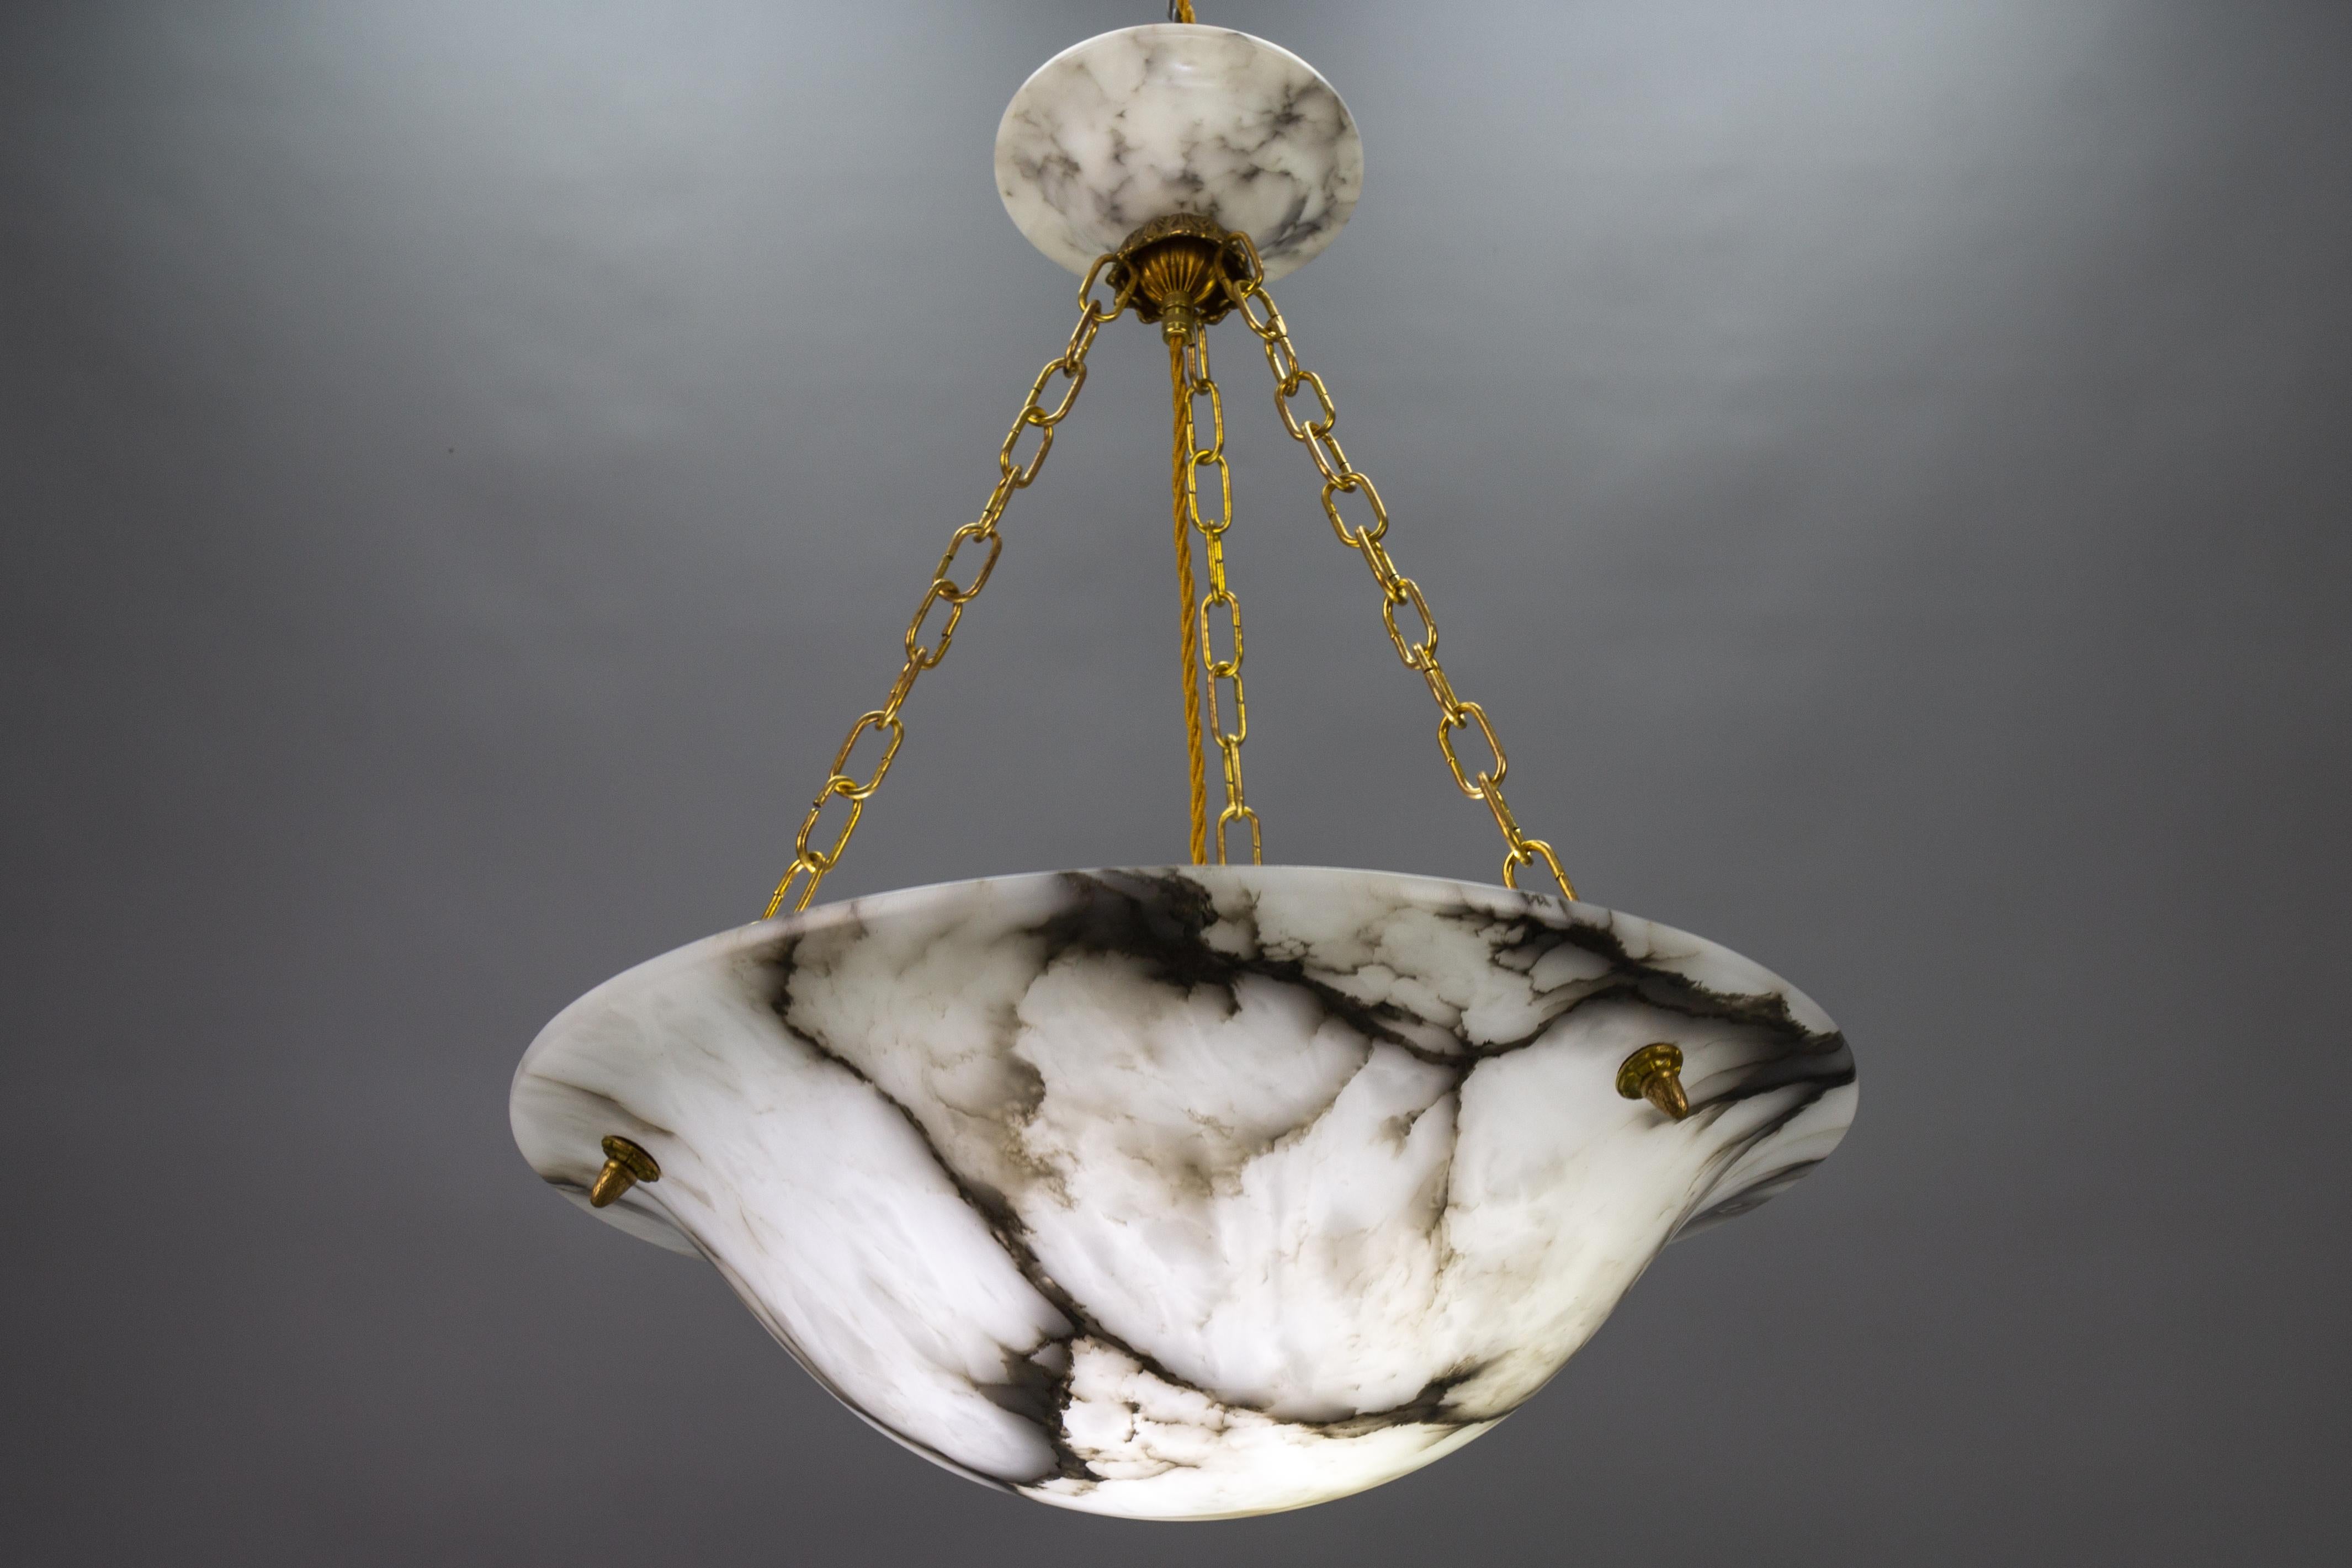 French Art Deco White and Black Veined Alabaster and Brass Pendant Light, ca 1920